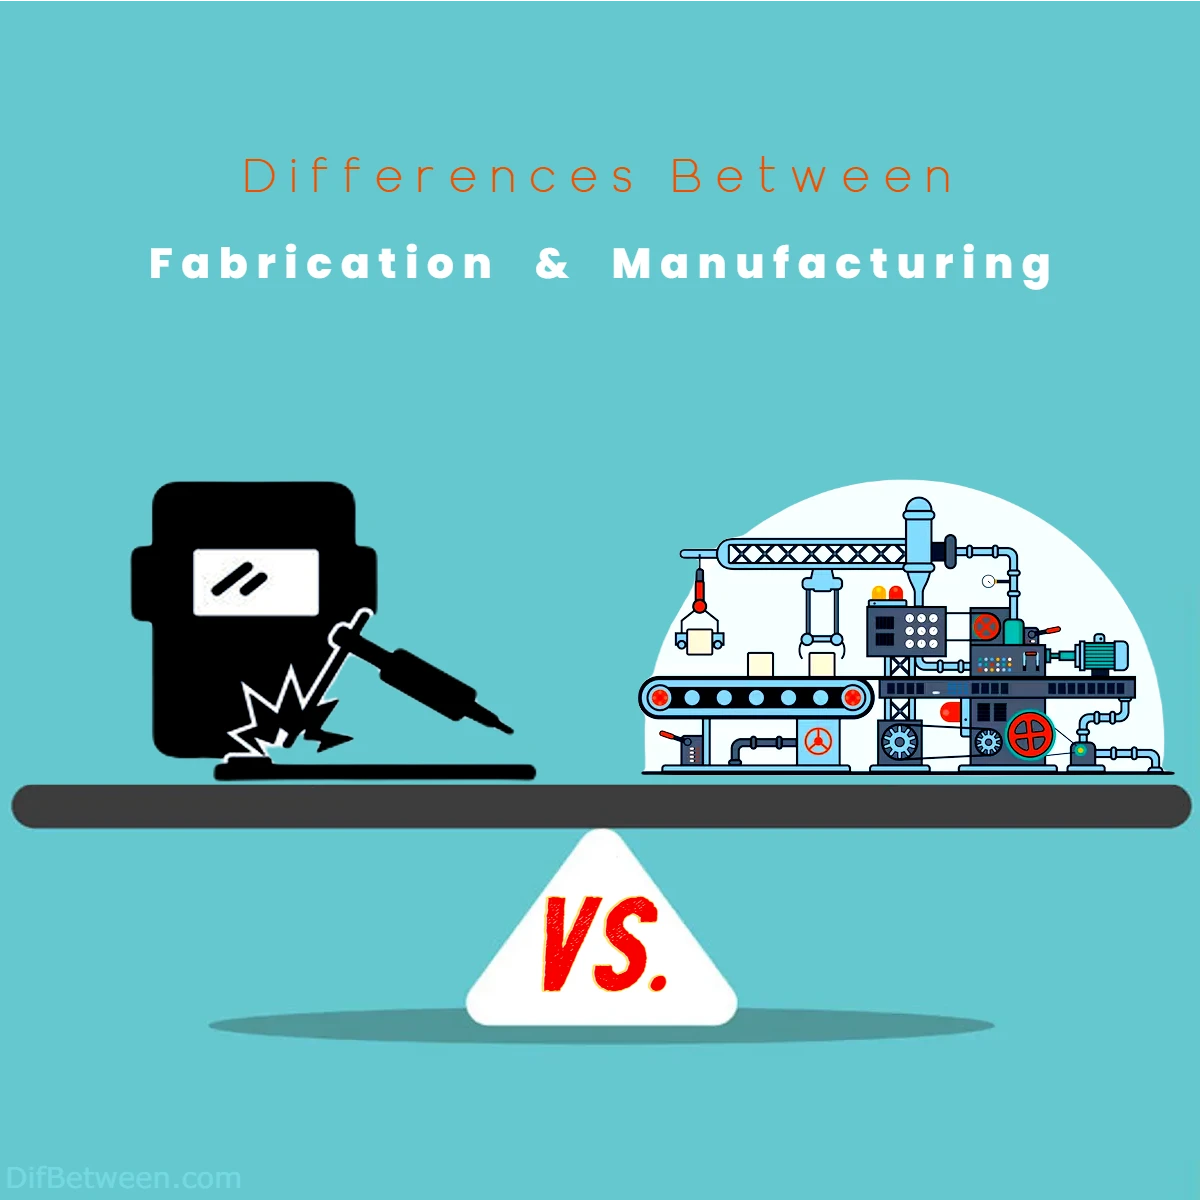 Differences Between Fabrication vs Manufacturing